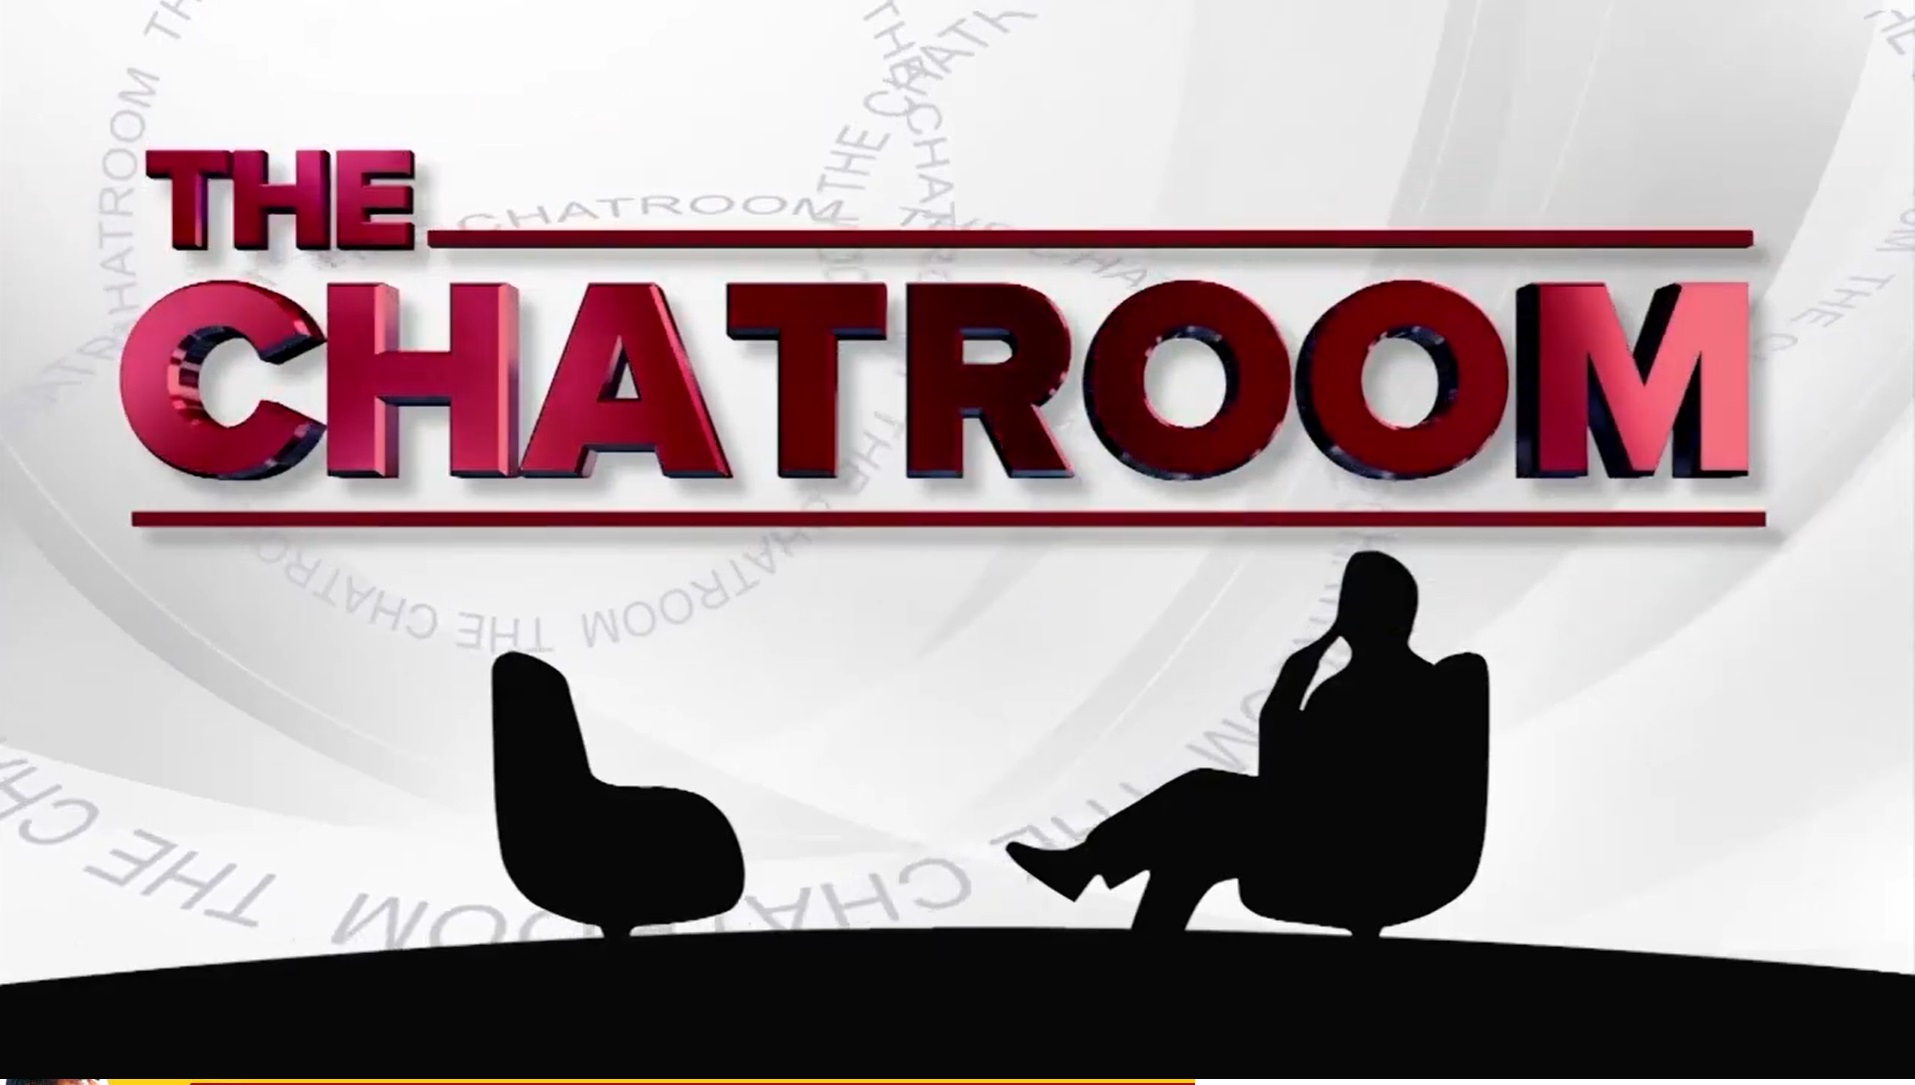 The Chatroom: Improvement of Philippine Information Agency